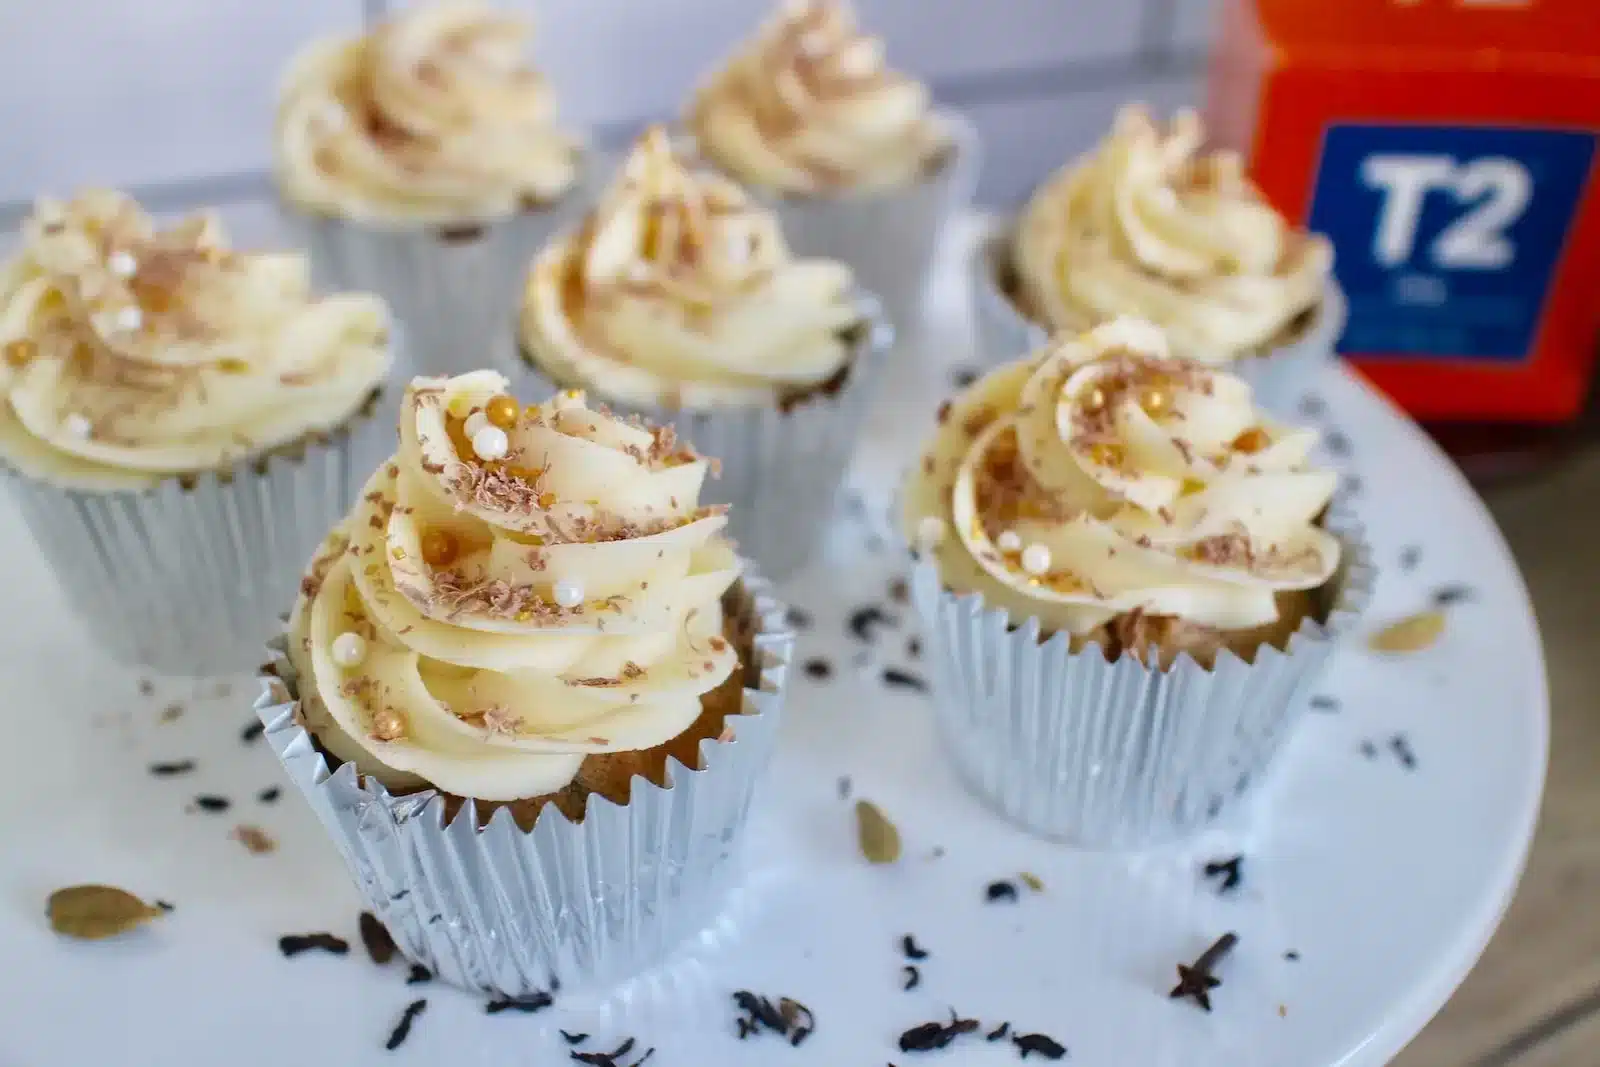 Does Buttercream Frosting Need to be Refrigerated?